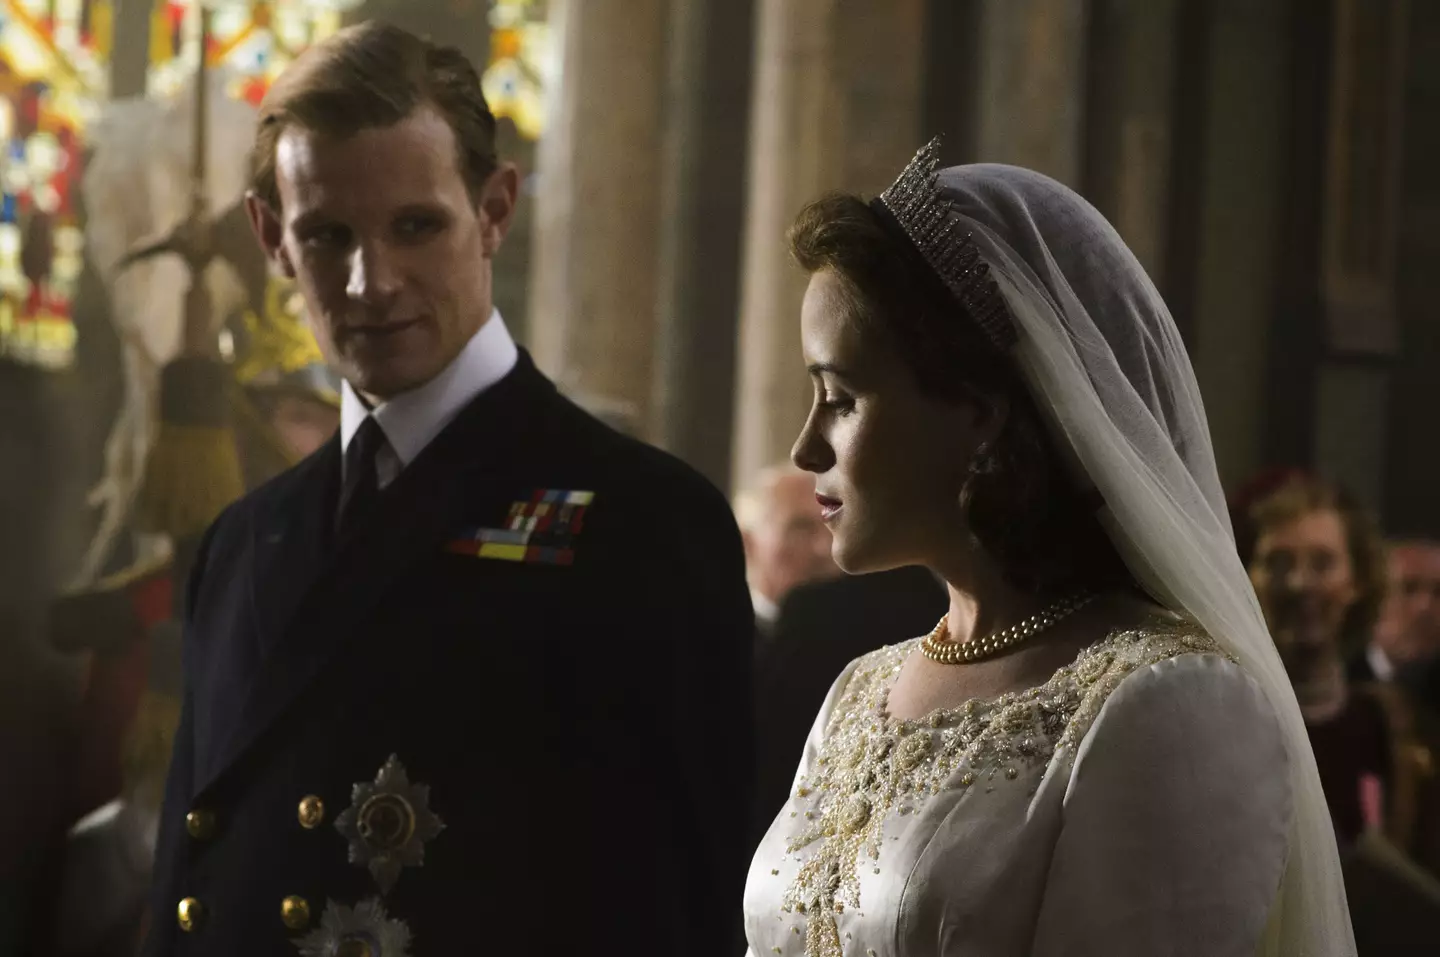 A sex scene between Queen Elizabeth and Prince Philip was axed from the series.